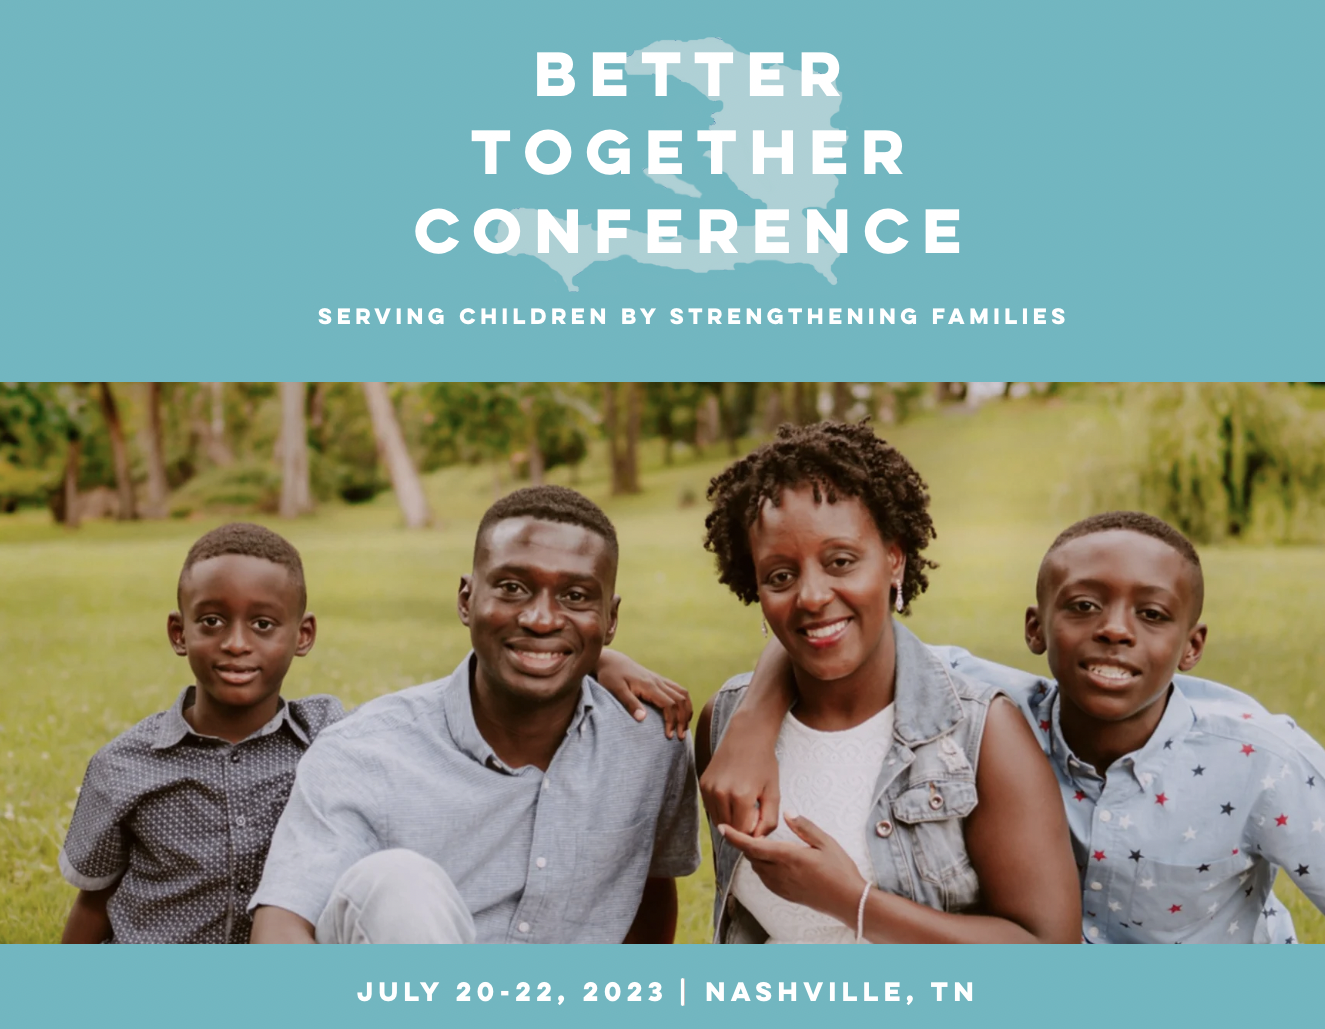 Better Together Conference Serving Children by Strengthening Families